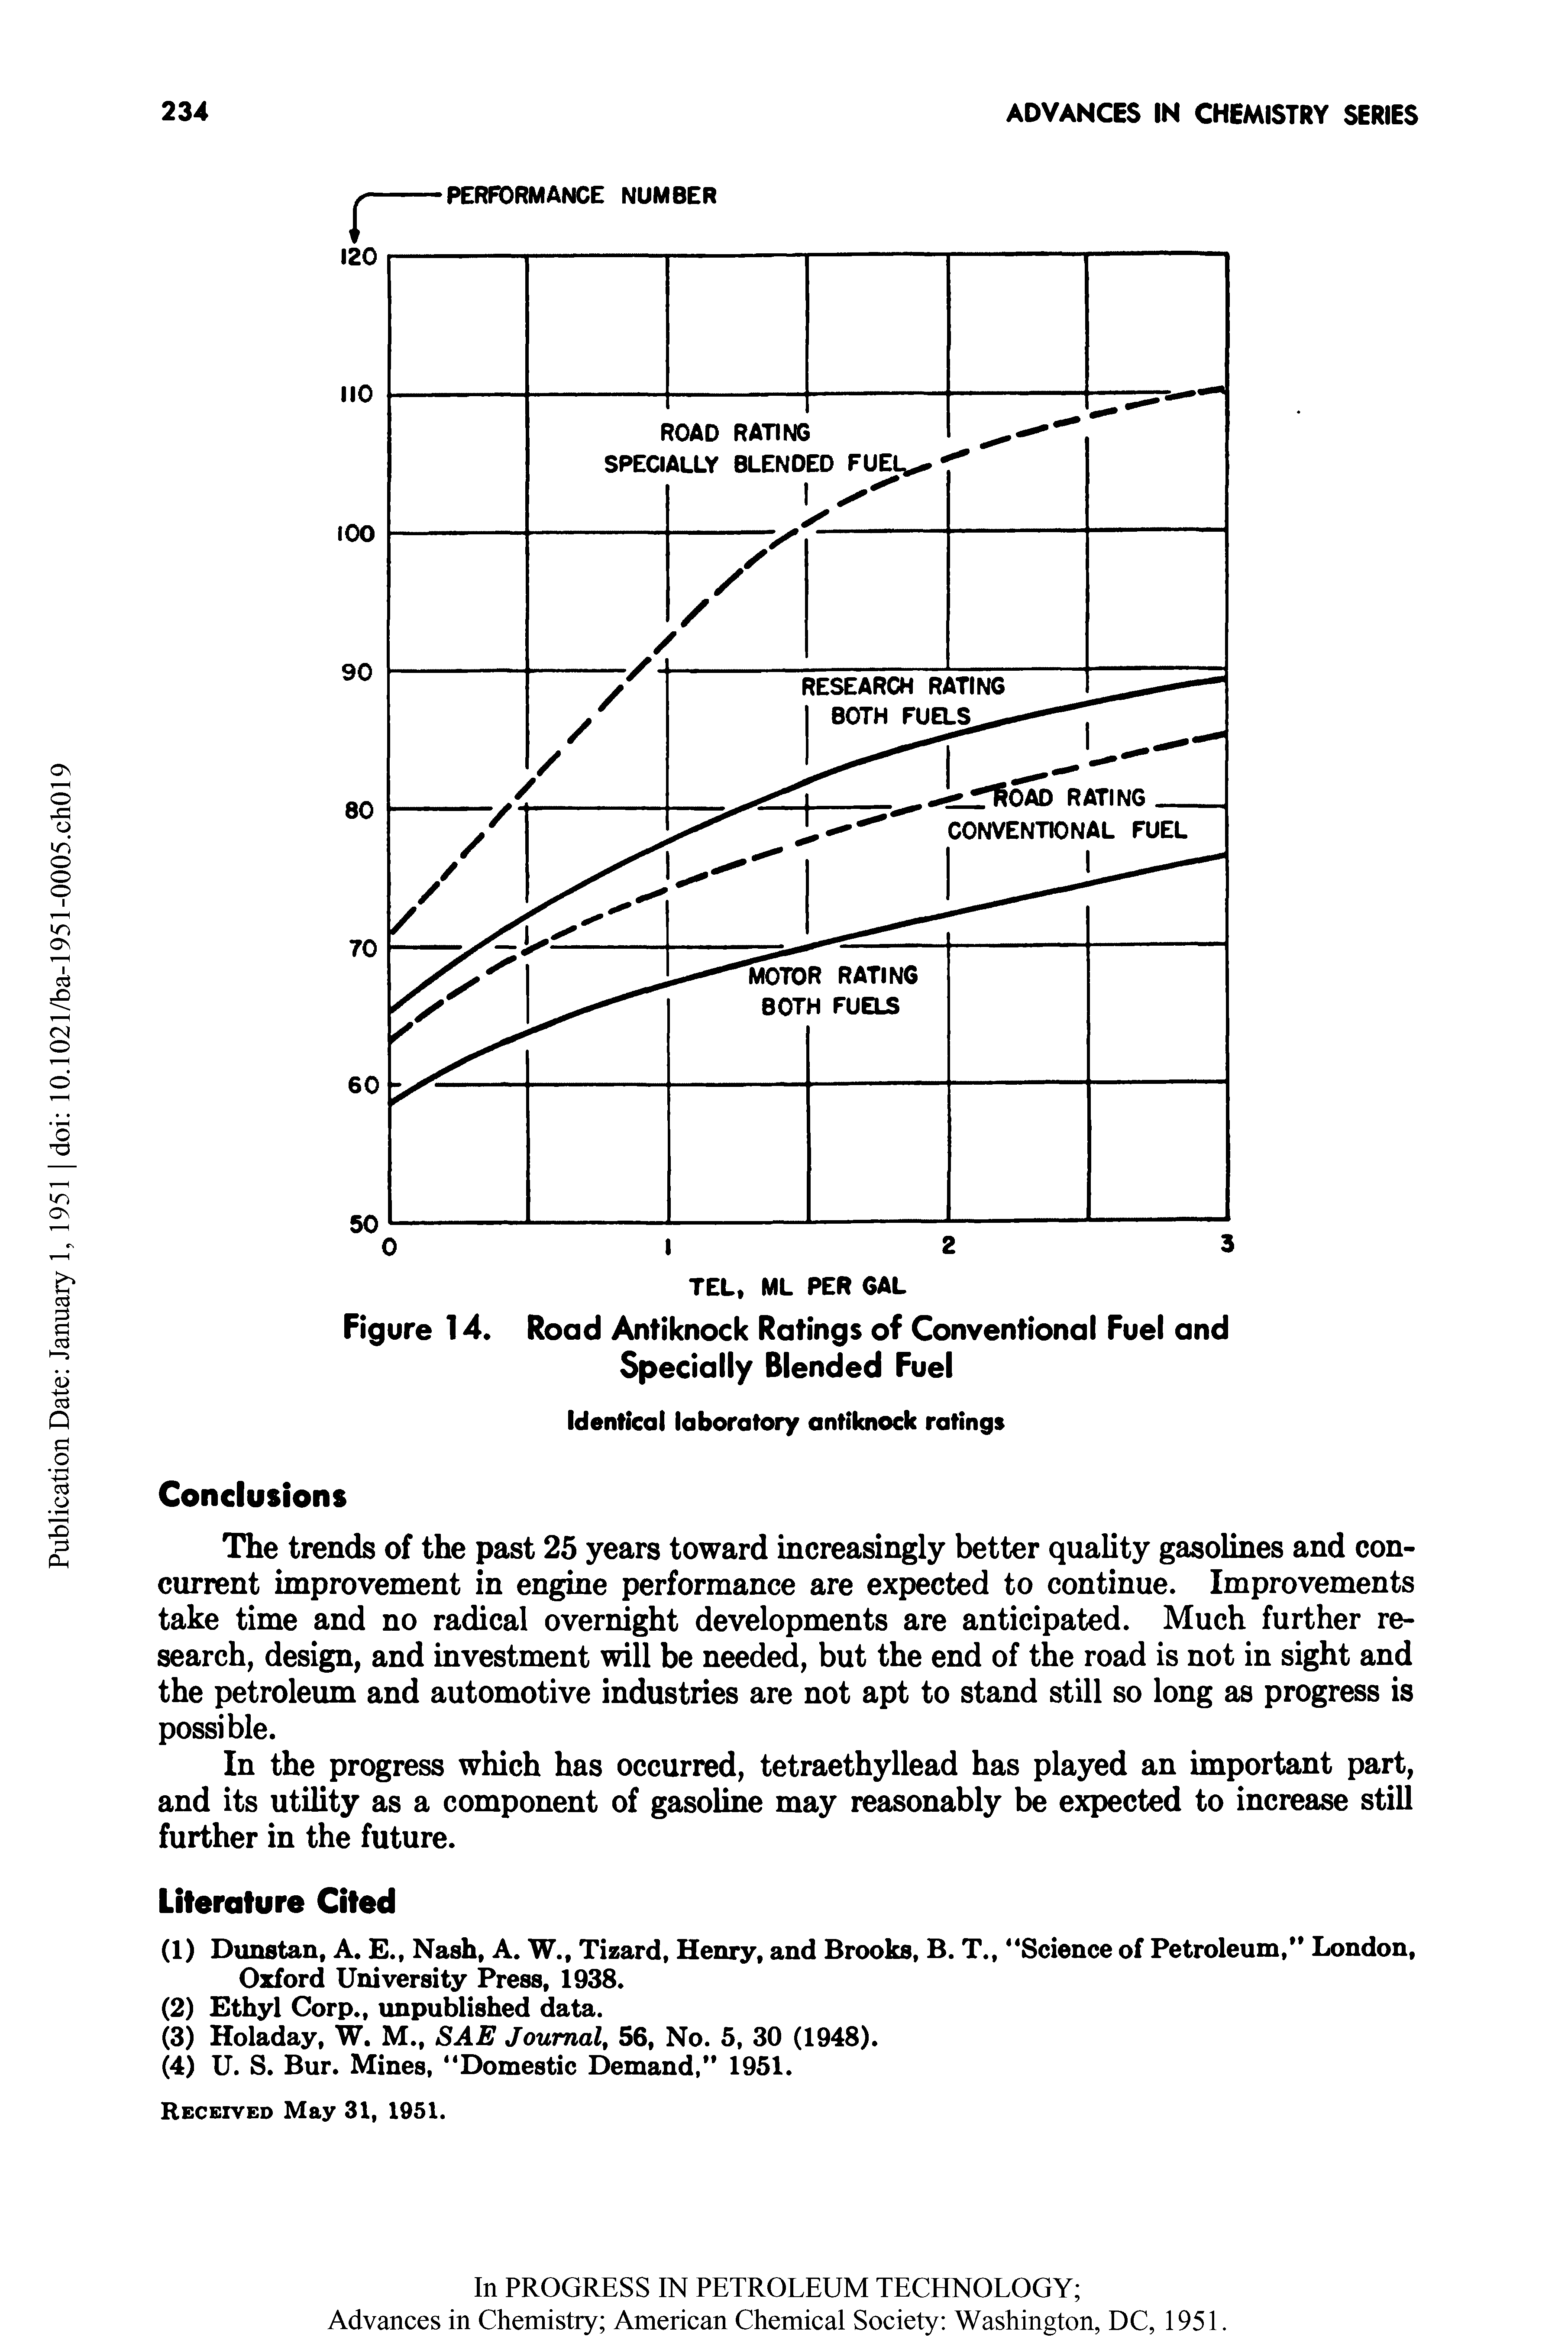 Figure 14. Road Antiknock Ratings of Conventional Fuel and Specially Blended Fuel...